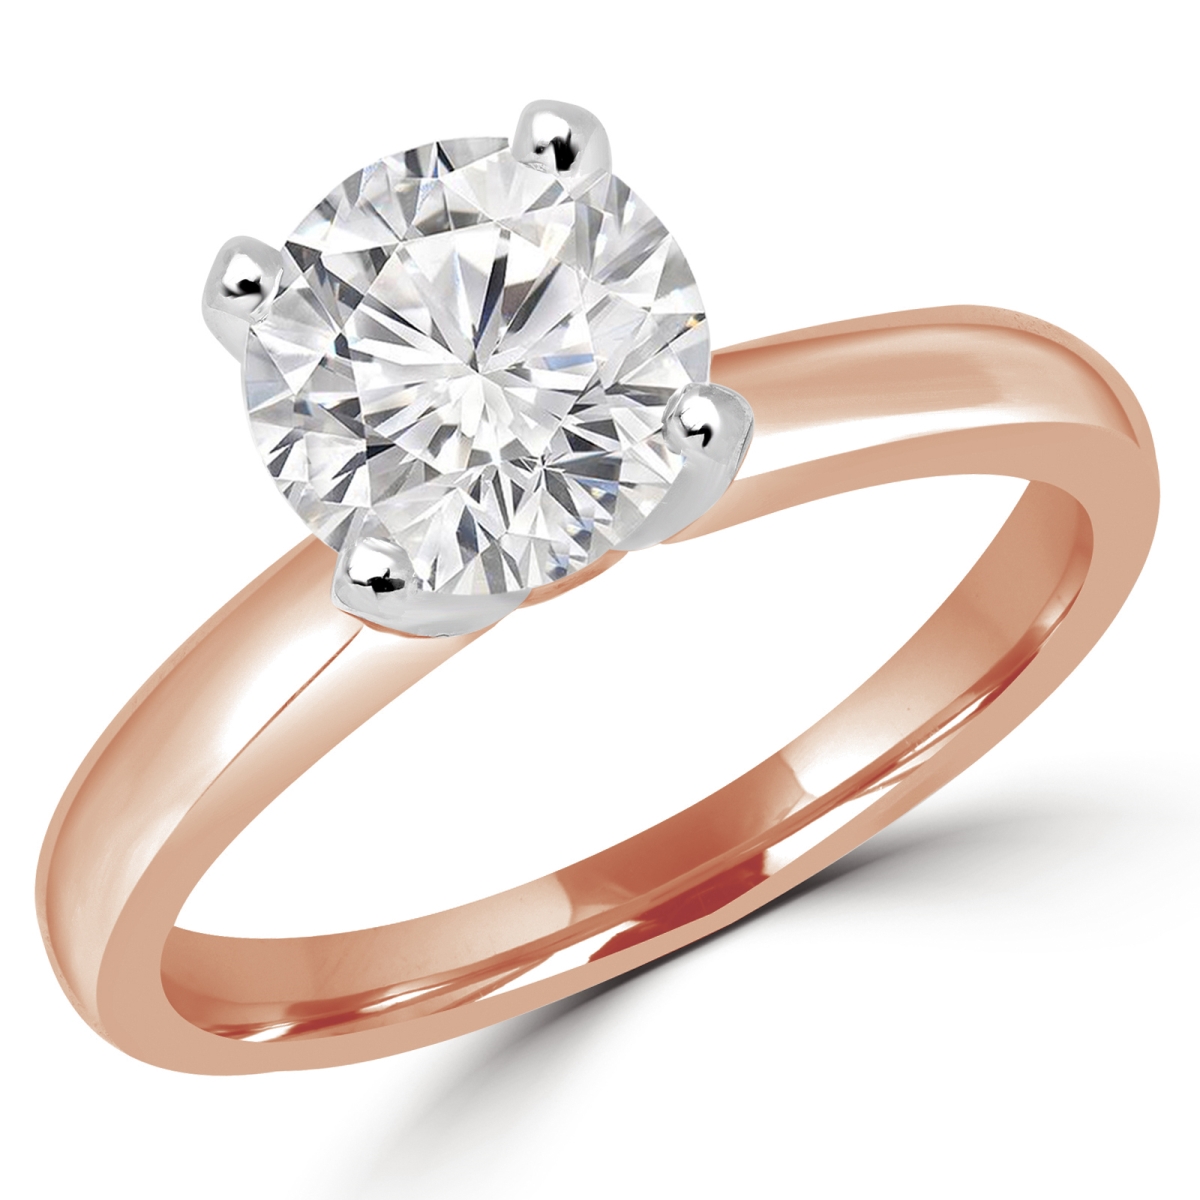 Picture of Majesty Diamonds MD180009-4 0.6 CT Round Diamond Solitaire Engagement Ring in 14K Rose Gold - Size 4